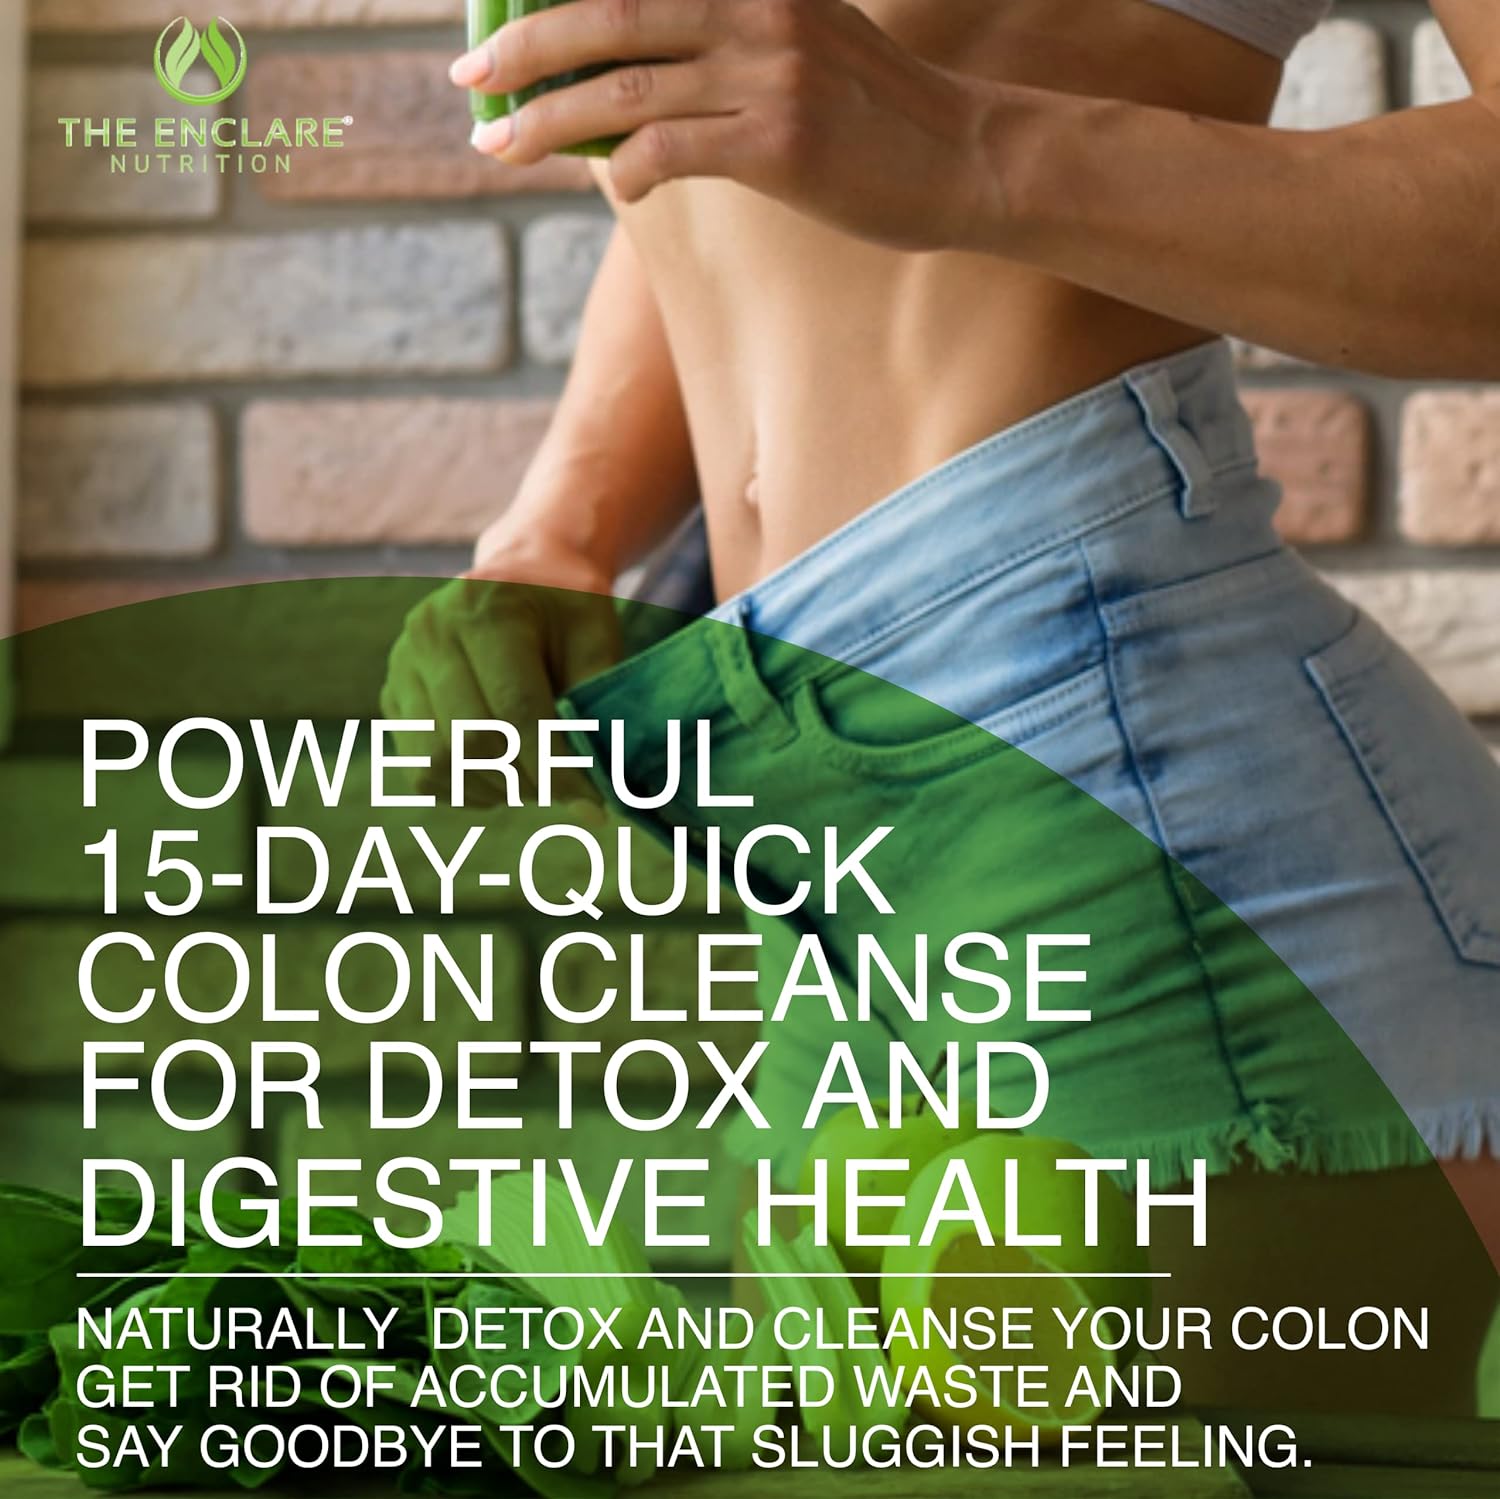 Colon Cleanser Detox. Premium 15 Day Fast-Acting Detox Cleanse Diet Pills, Probiotic, Fiber, Natural Laxatives for Constipation Relief, Bloating. Colon Cleanse Boosts Energy, Focus, Gut Health (1)